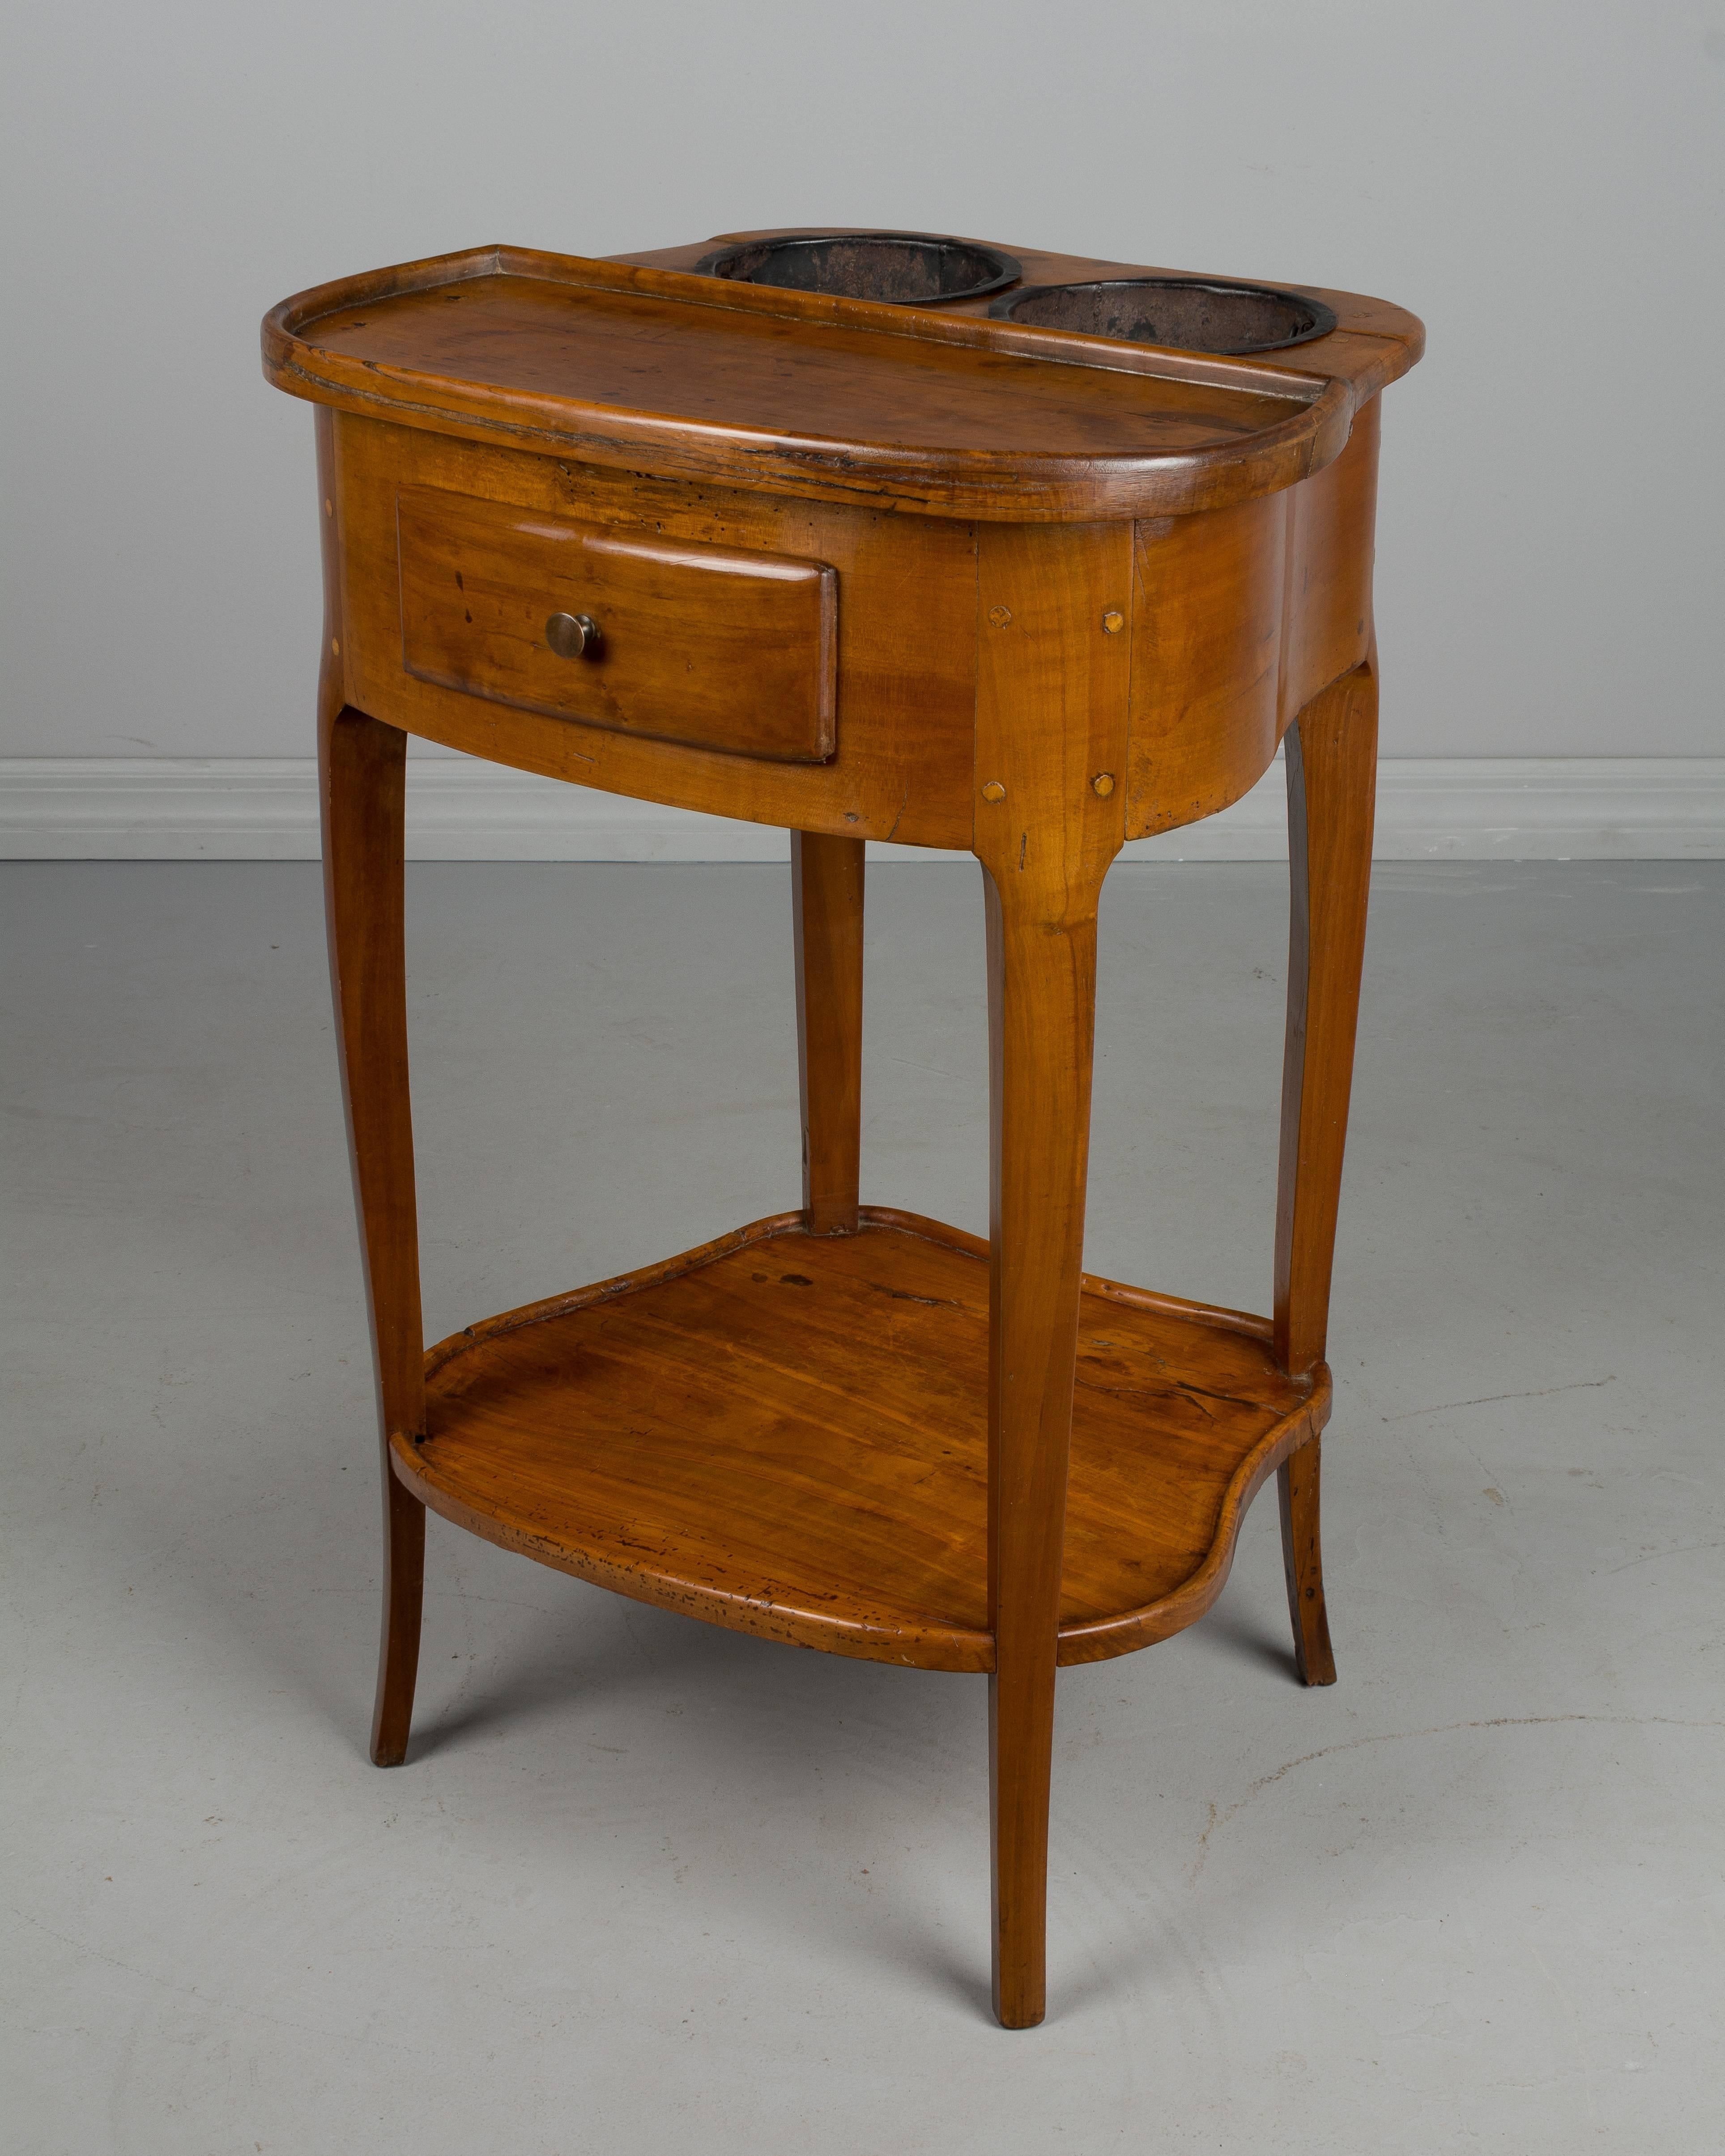 An 18th century French Louis XV style Rafraîchissoir side table with elegant curved shape and cabriole legs, a single dovetailed drawer and lower shelf. Made of solid cherrywood with pegged construction and warm waxed patina. Original removable tin